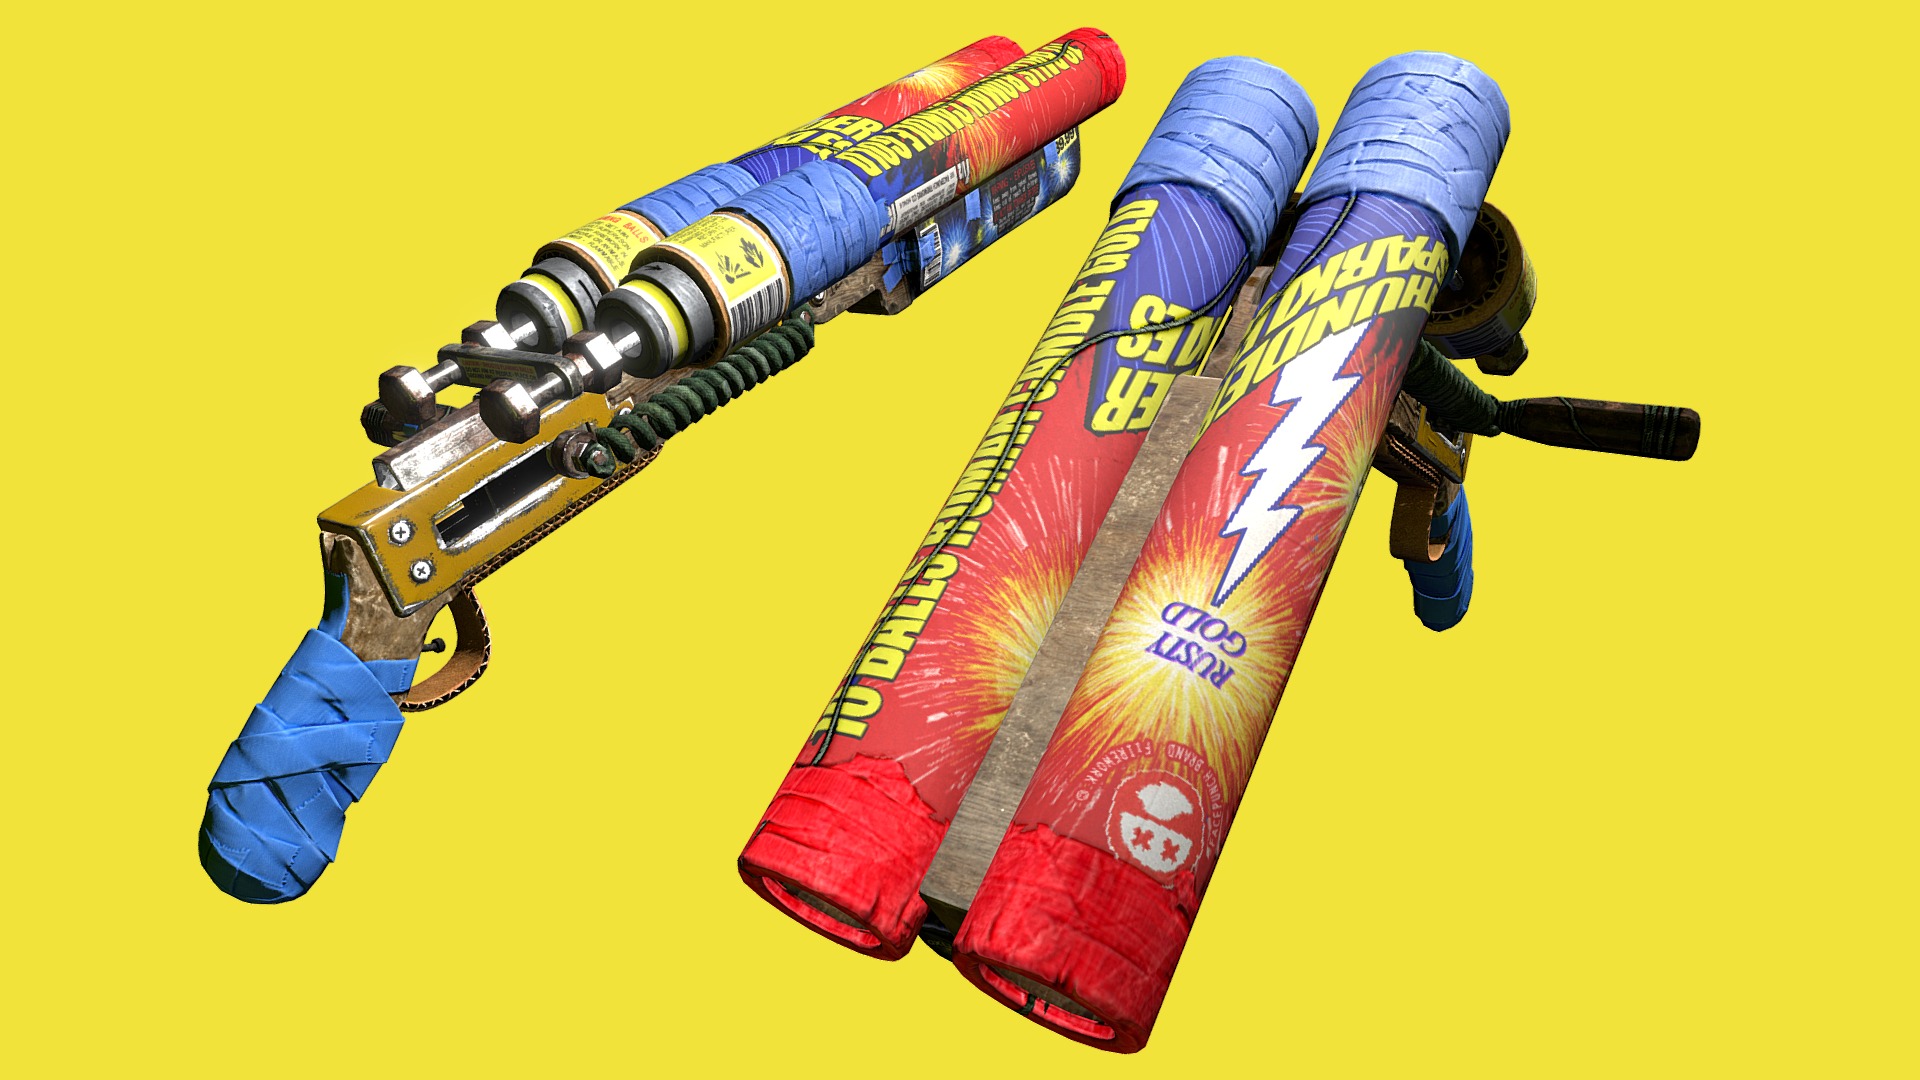 A disgusting yellow background to go with all that gross tacky firework art 3d model